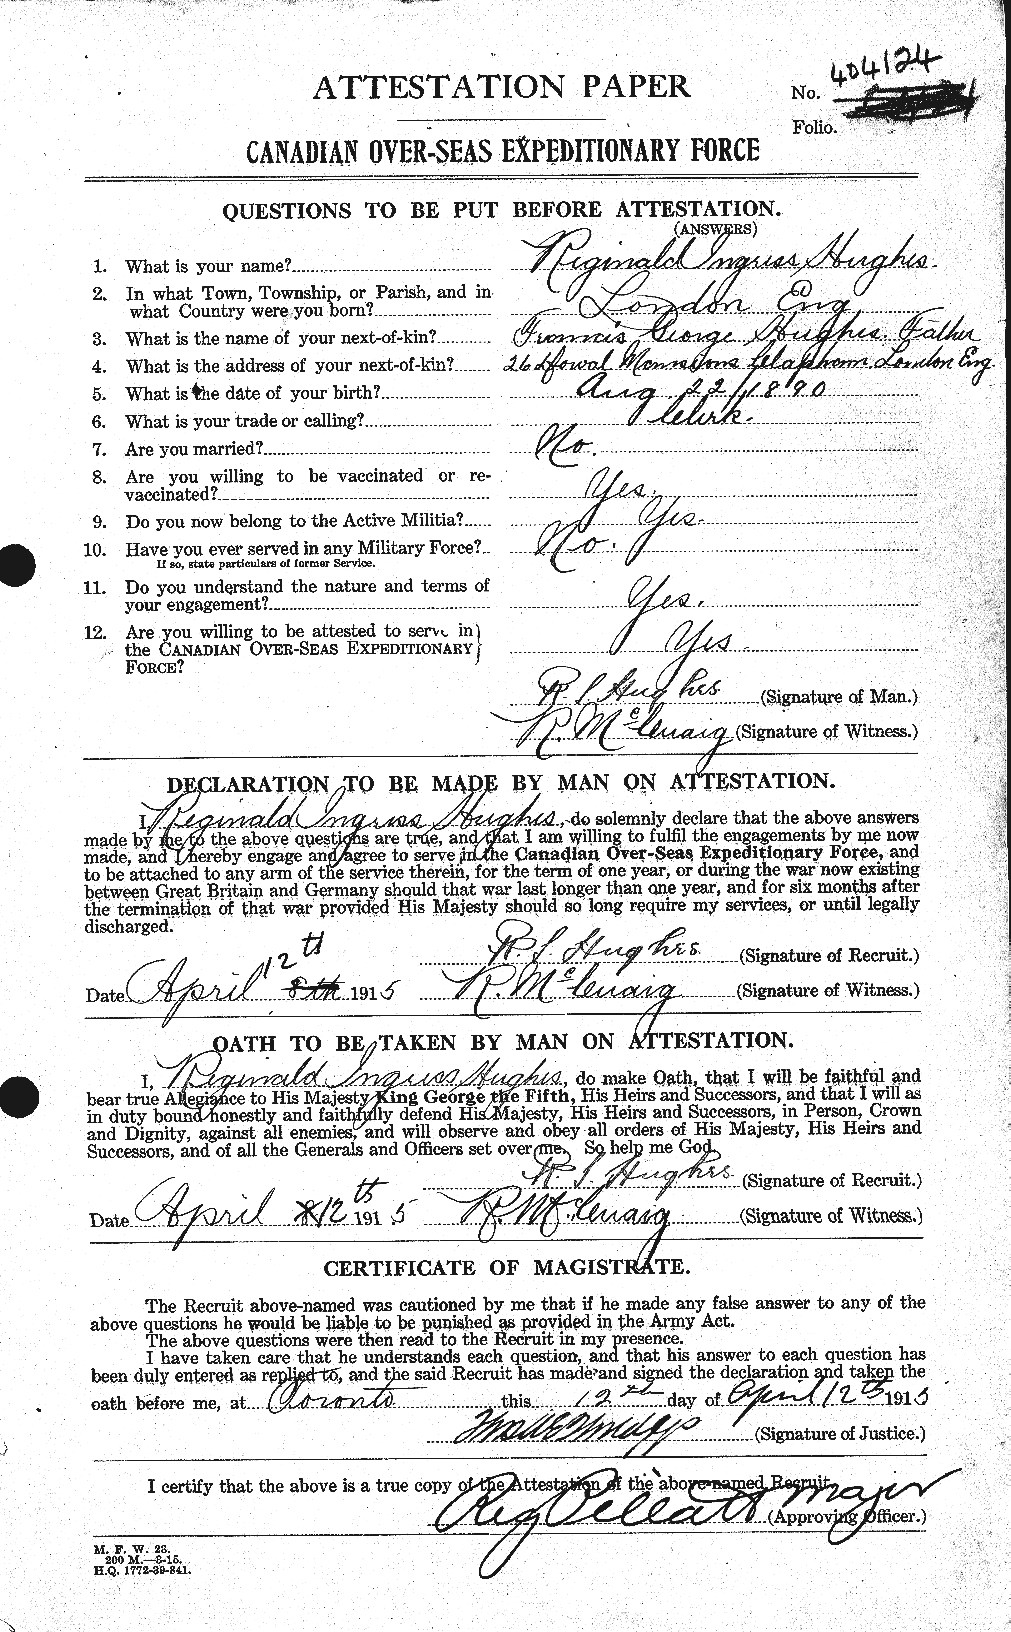 Personnel Records of the First World War - CEF 404178a